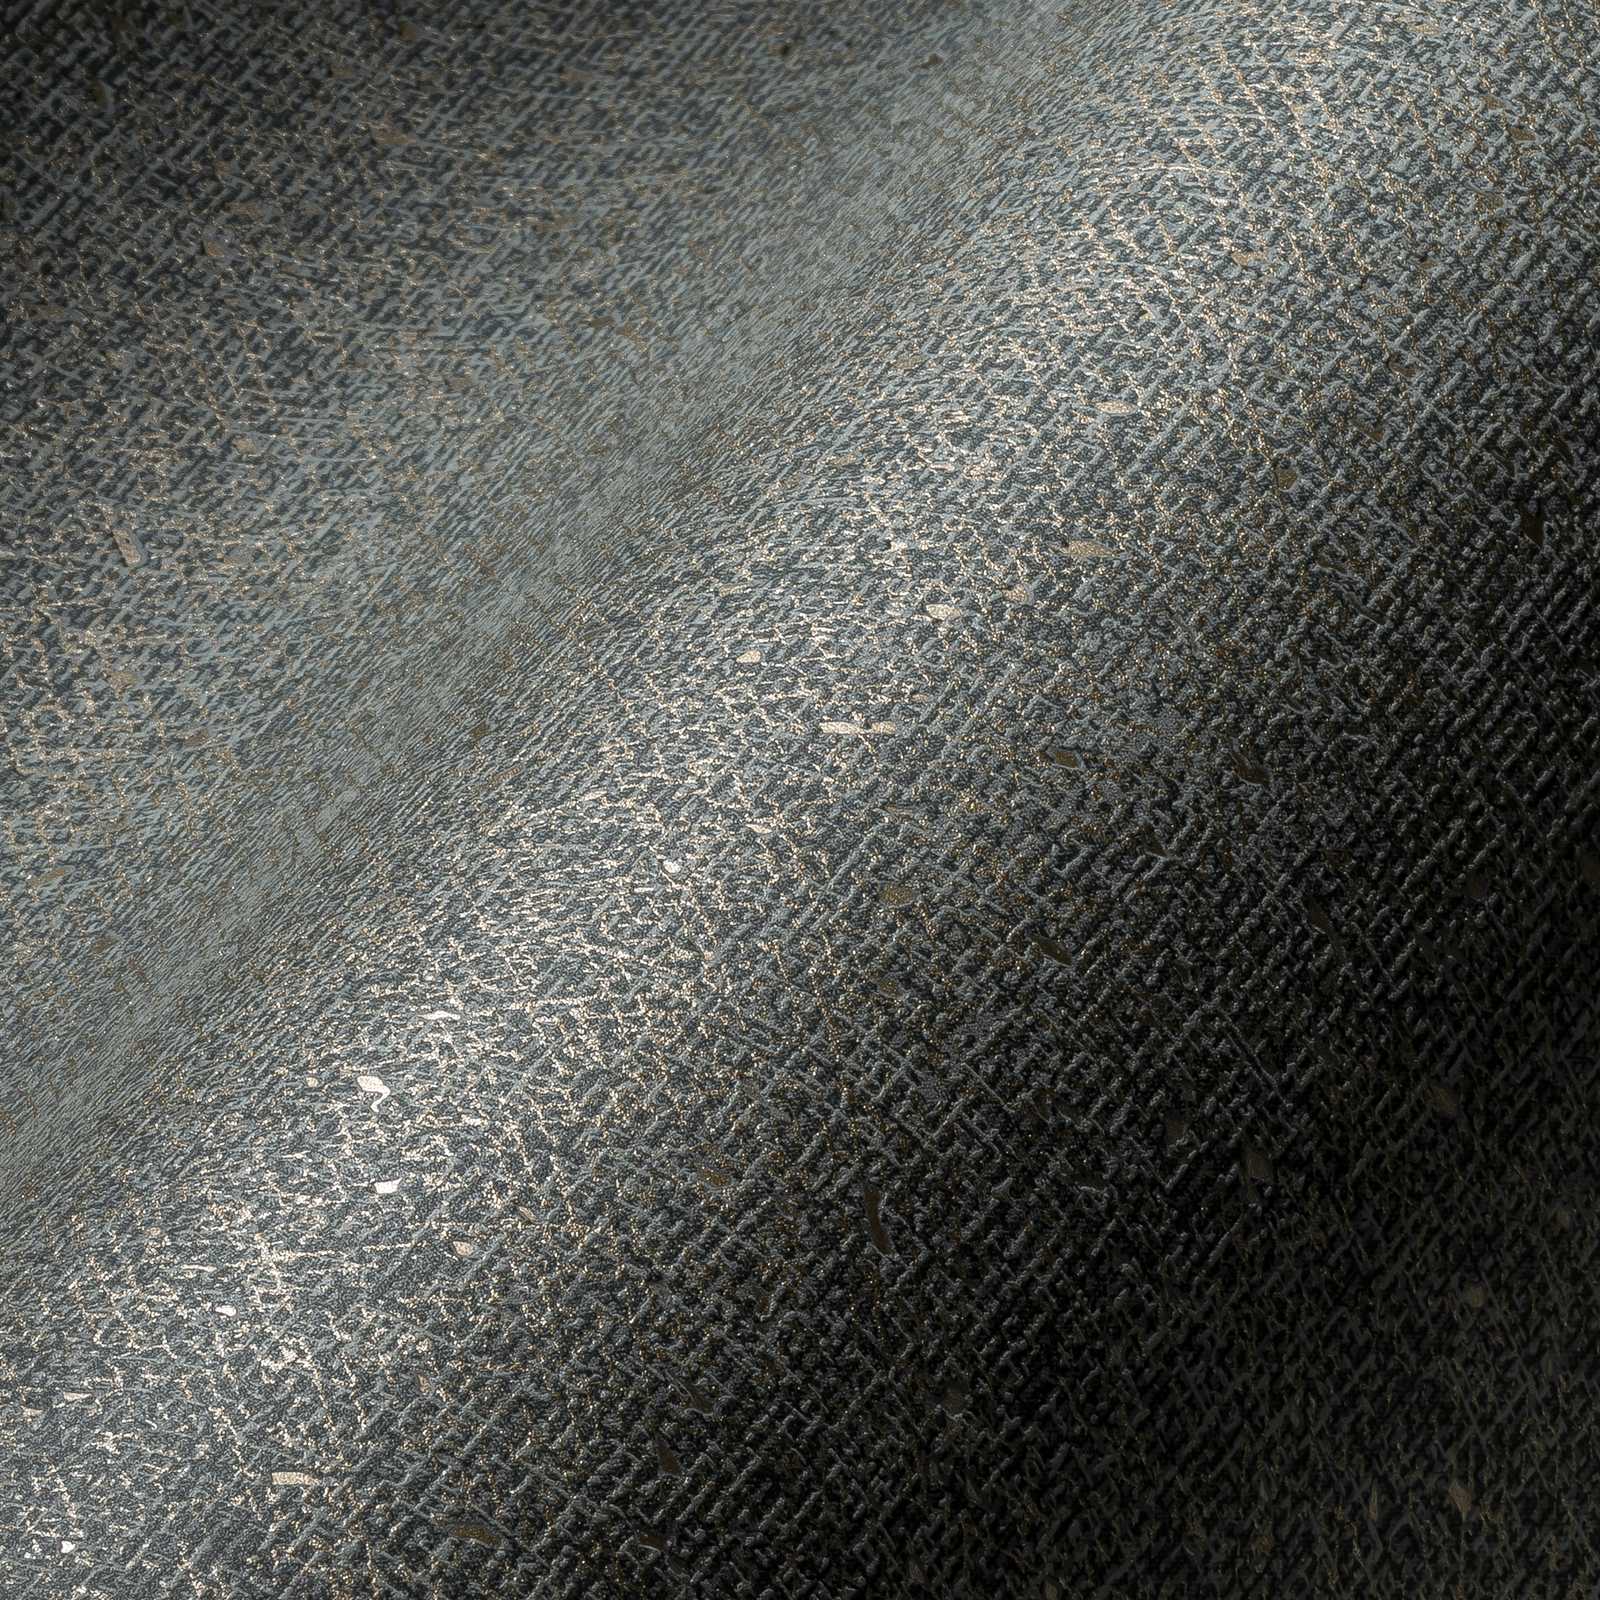             Wallpaper with textile structure and metallic accent - grey, metallic
        